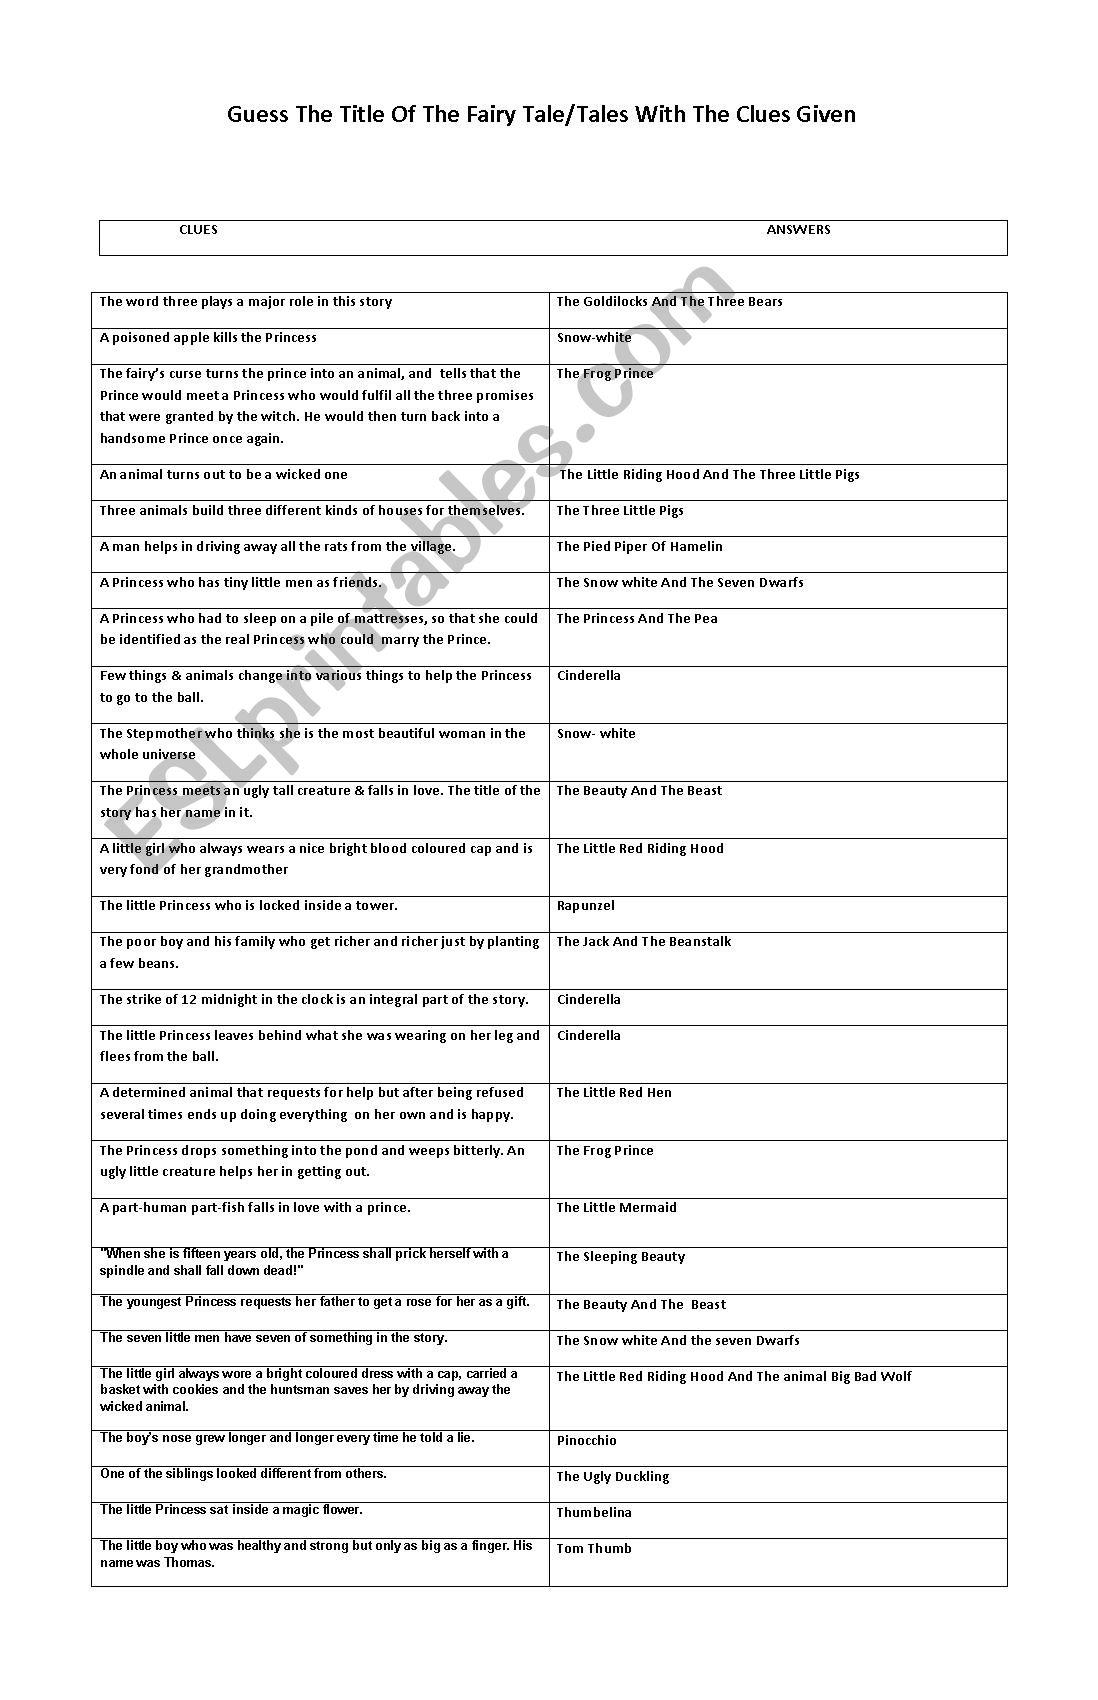 The The fairy - ESL worksheet by vedh